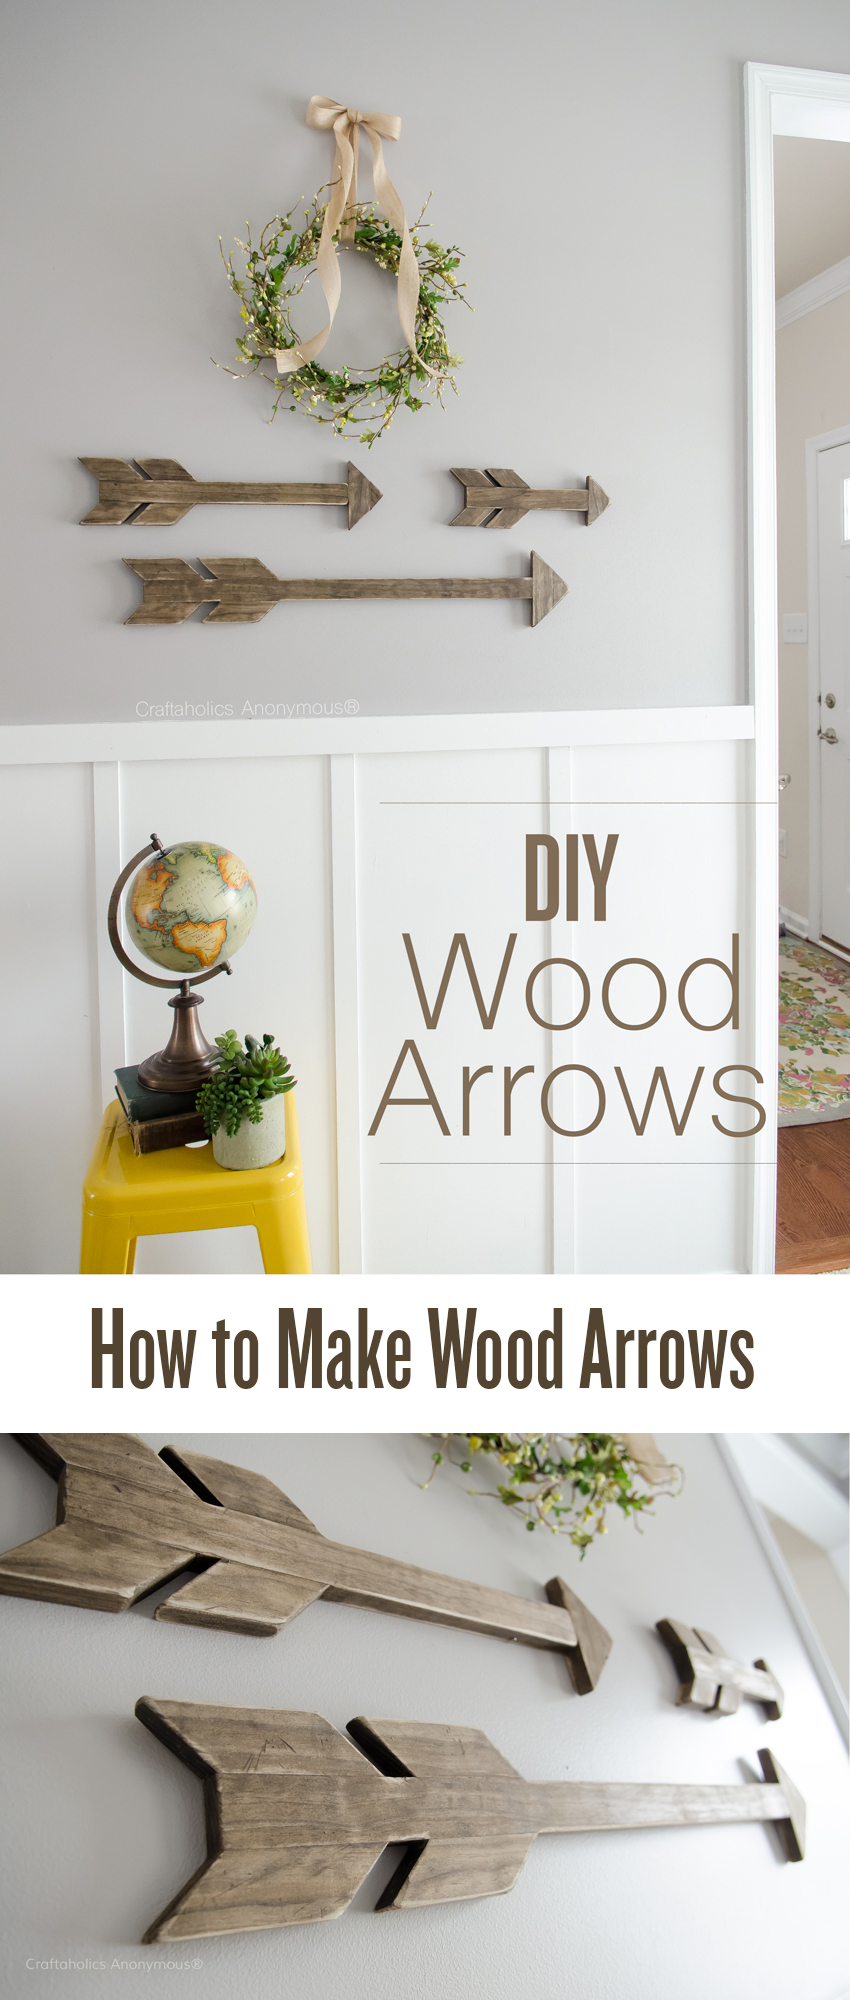 How To's for Wood Arrows || Tips, tricks, measurements, etc. Arrows are fun for walls, mantels, shelves, etc